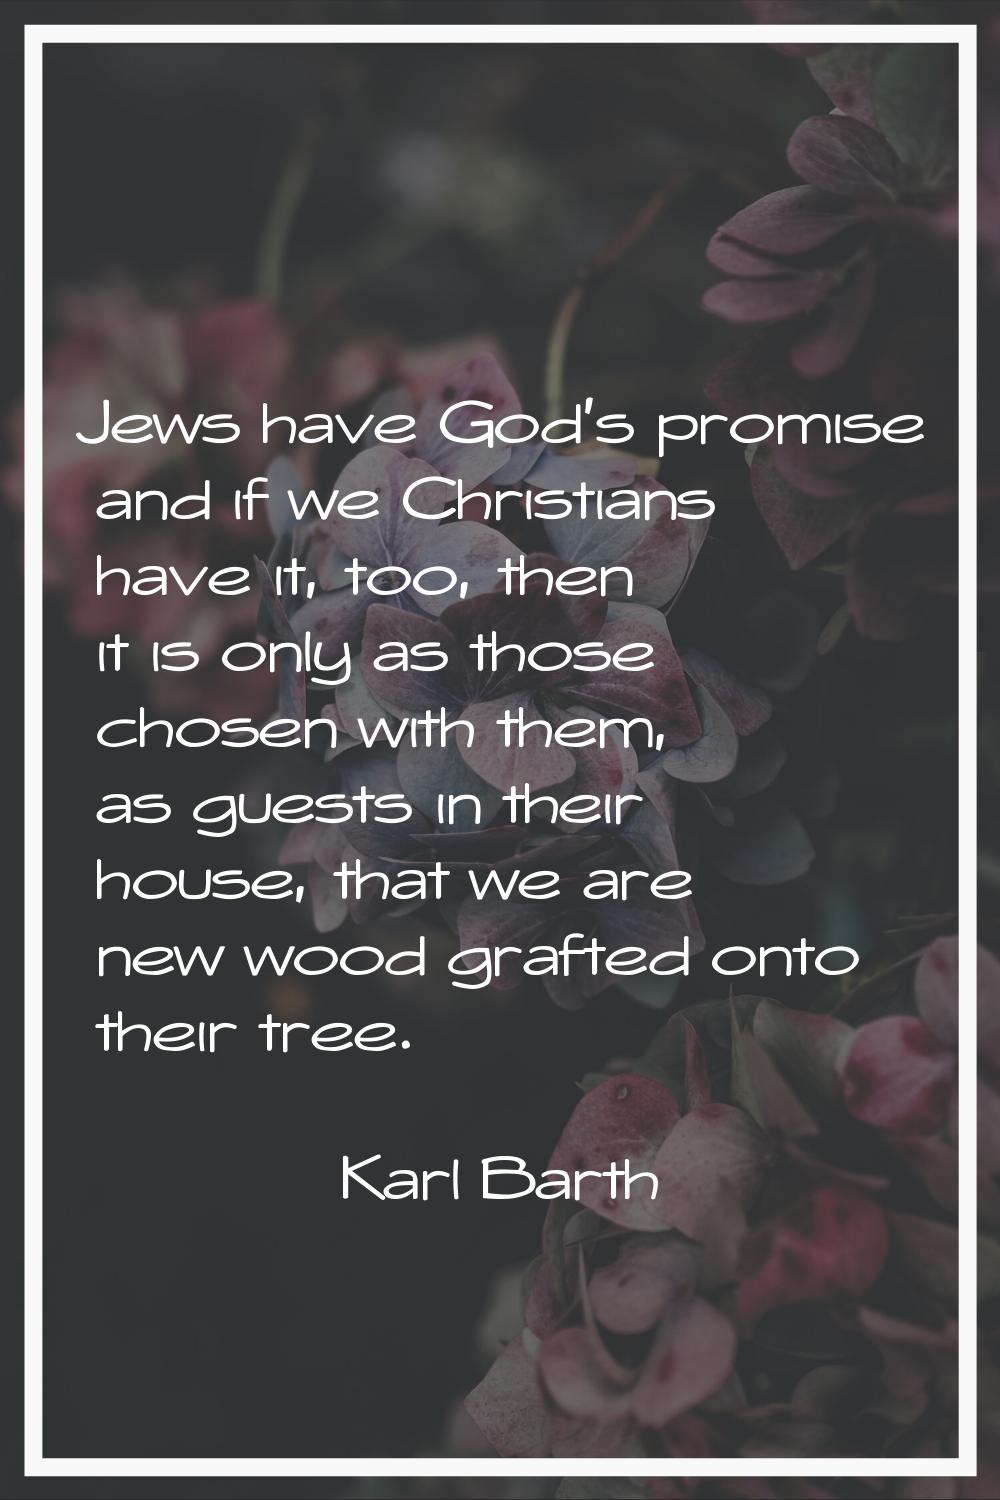 Jews have God's promise and if we Christians have it, too, then it is only as those chosen with the